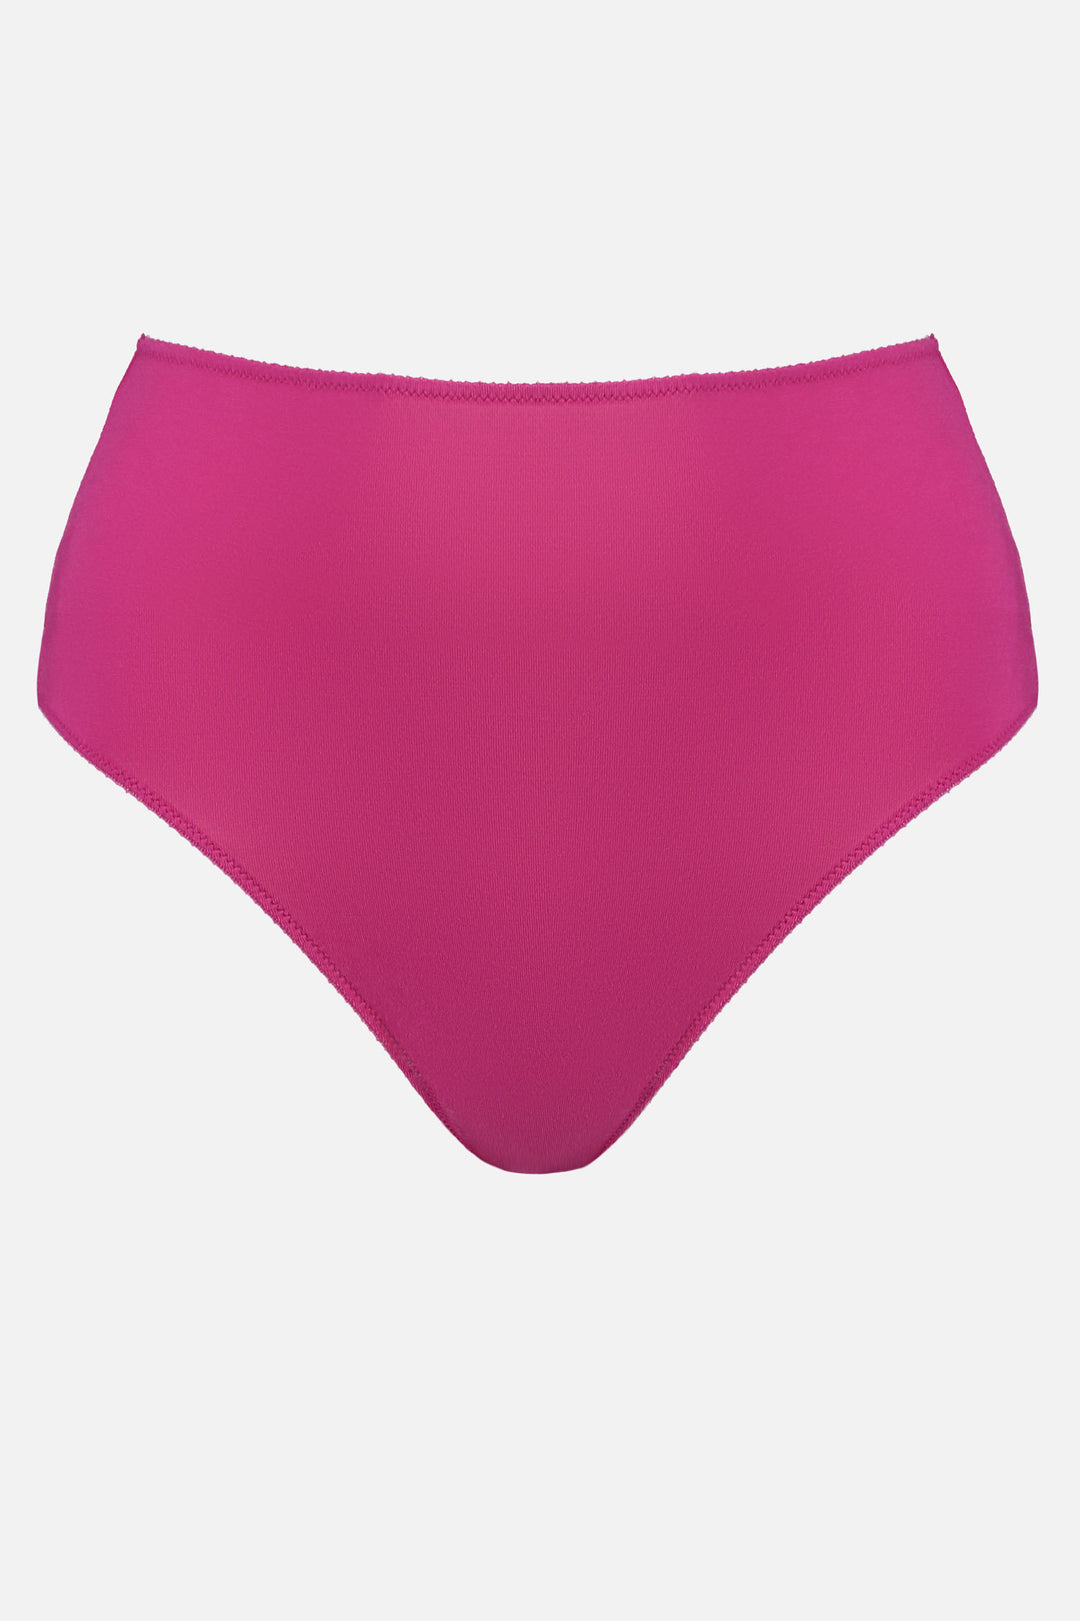 Videris Lingerie high waist knicker in bohemian magenta TENCEL™ cut to follow the natural curve of your hips